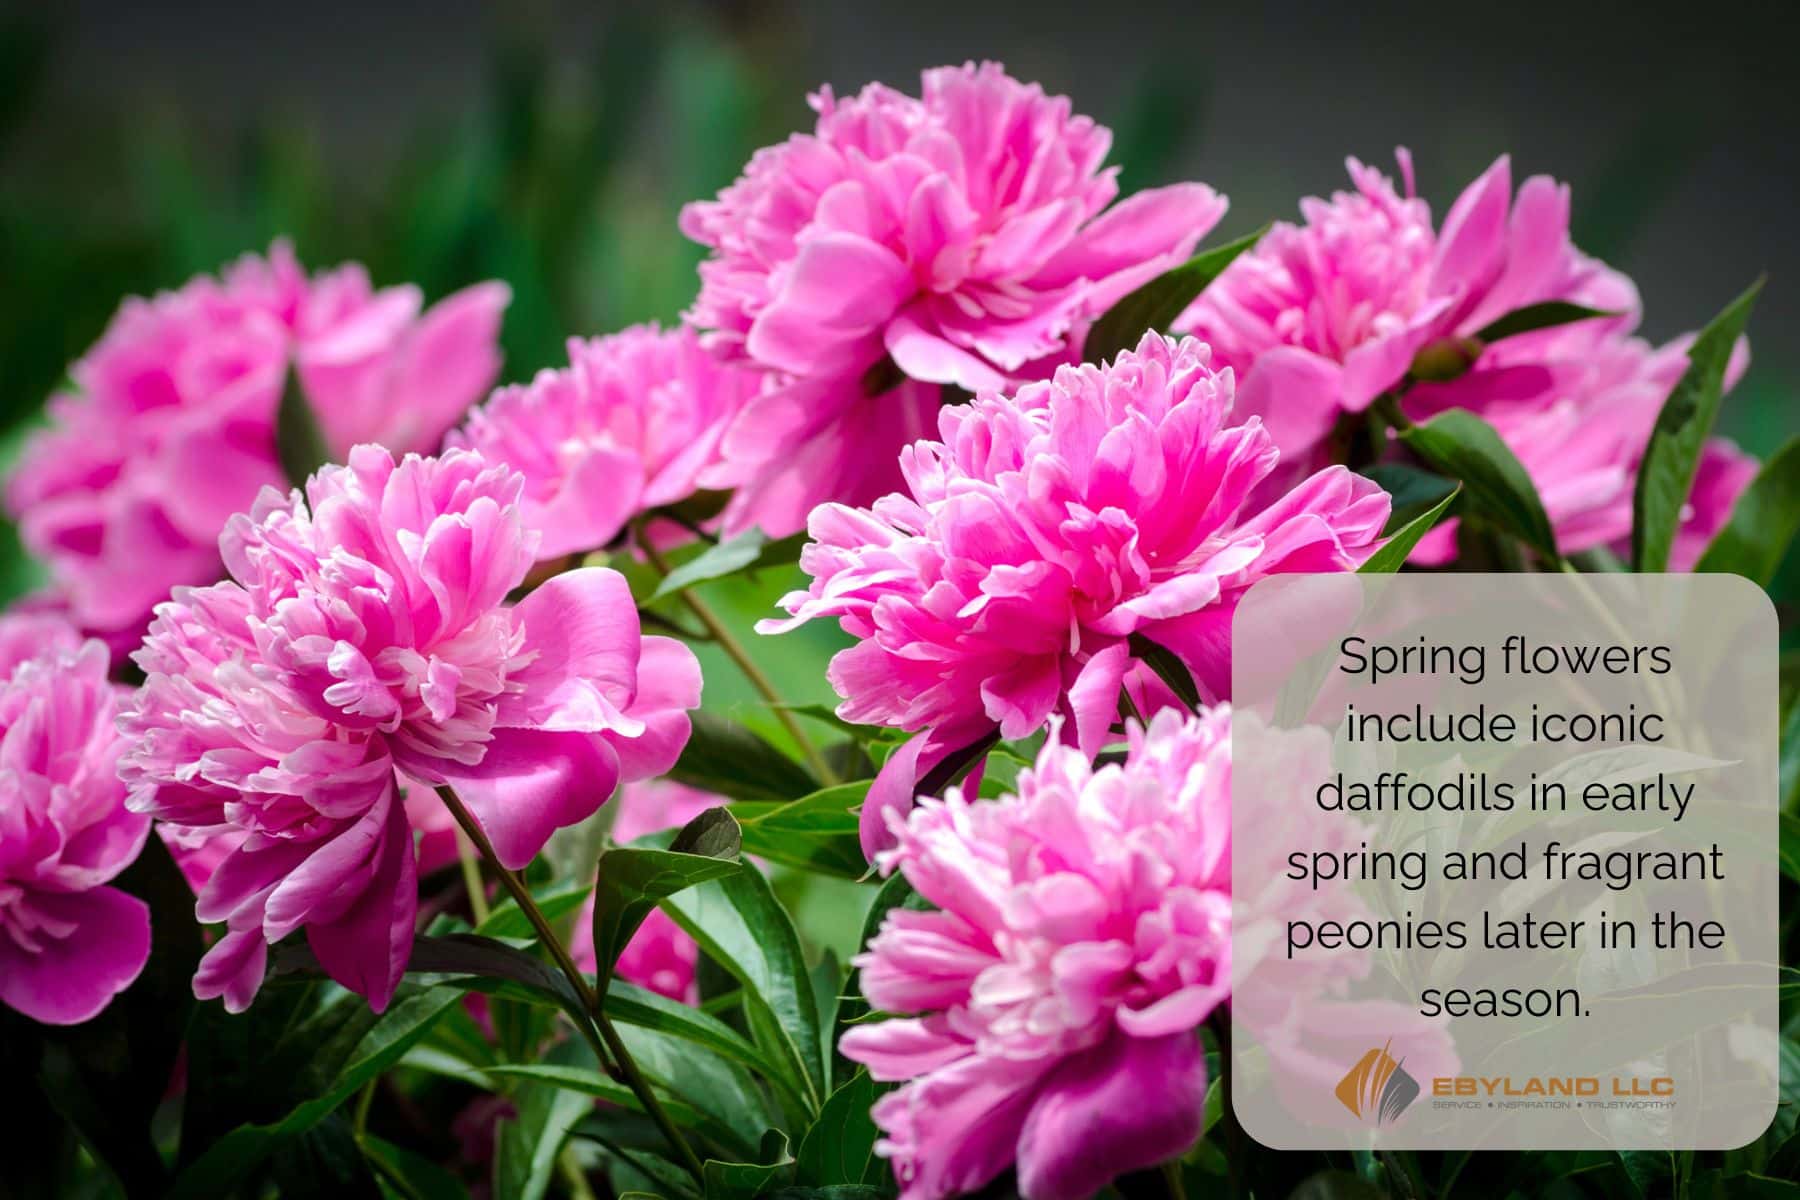 Close-up of vibrant pink peonies in full bloom. Text overlay reads: "Spring flowers include iconic daffodils in early spring and fragrant peonies later in the season." Beyland LLC.